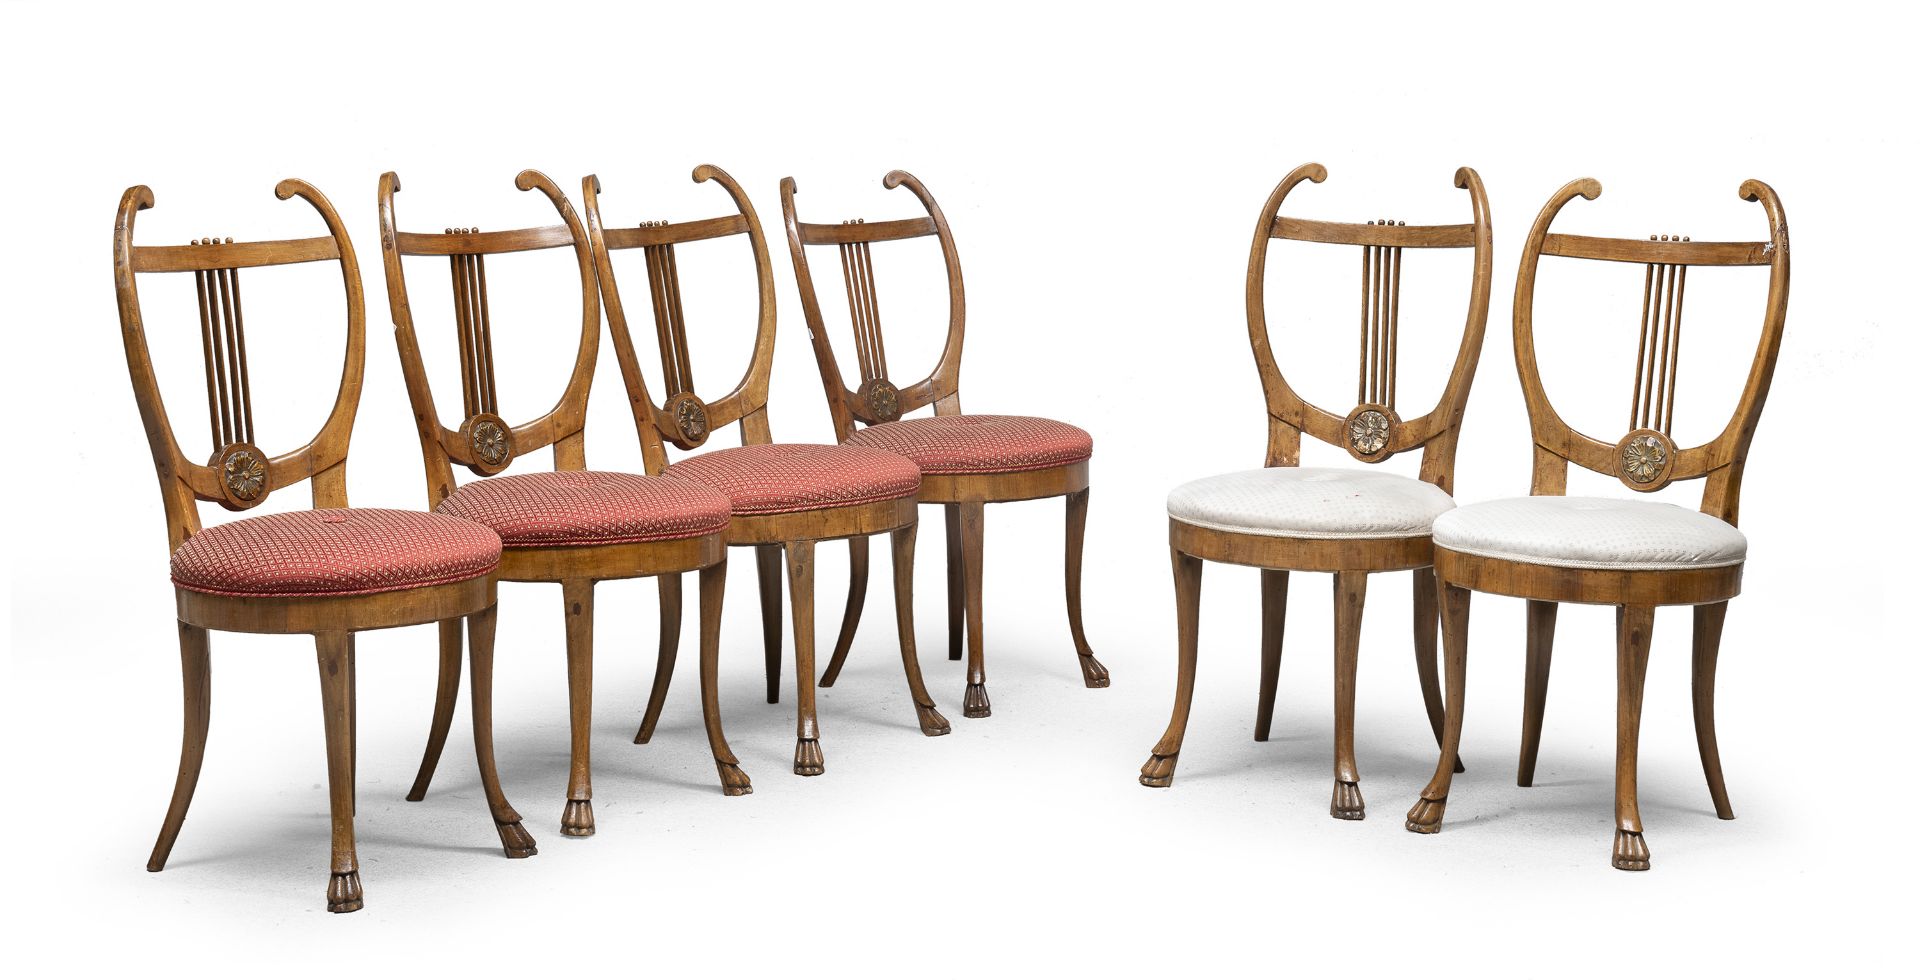 SIX CHERRY LYRE BACK CHAIRS EARLY 19TH CENTURY